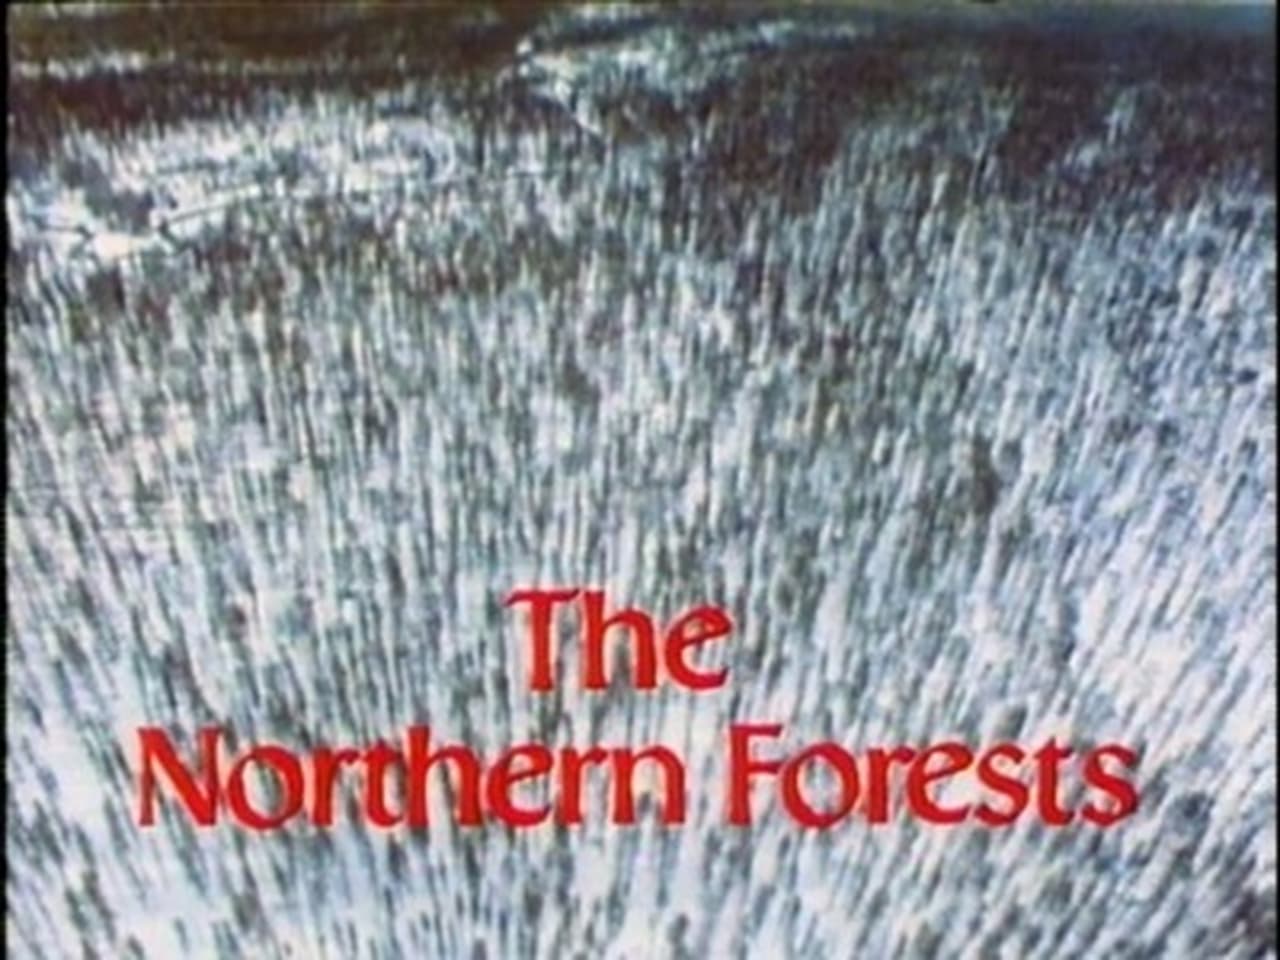 The Northern Forests